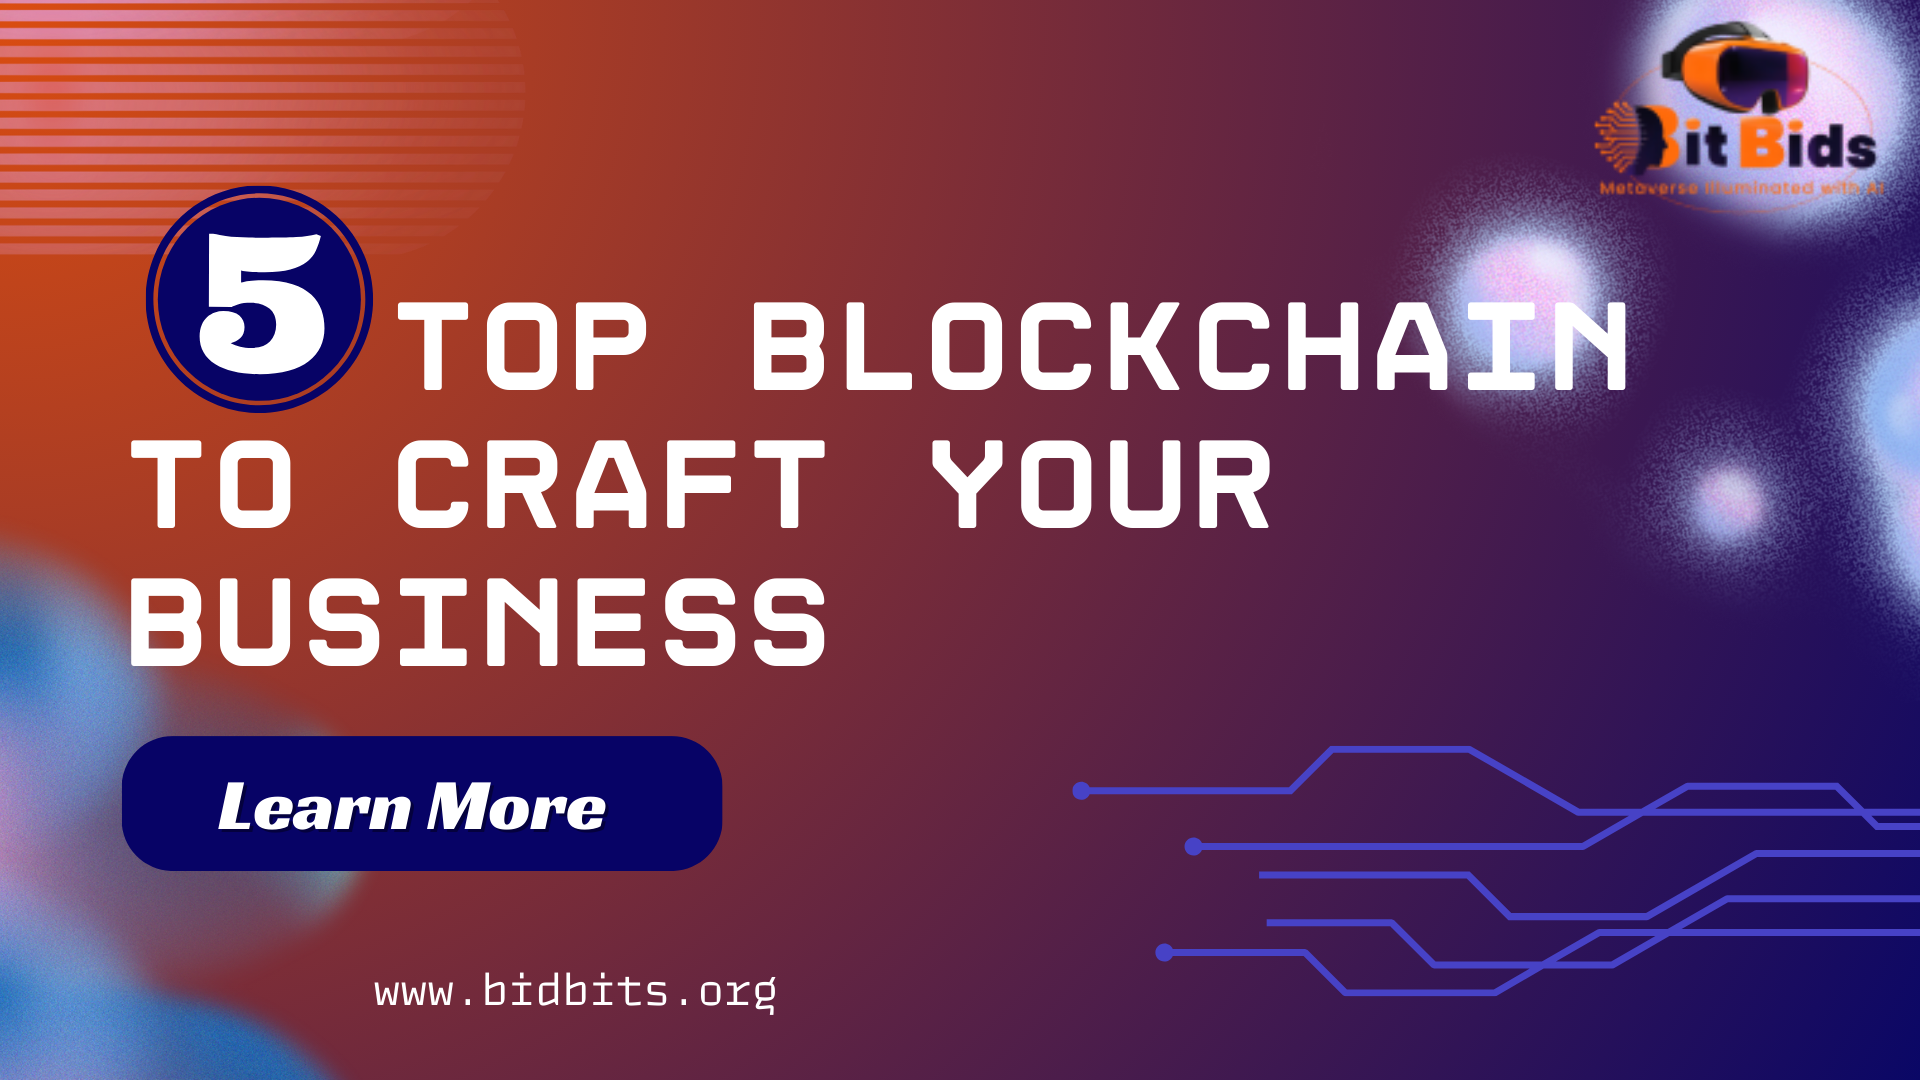 top 5 blockchain for business